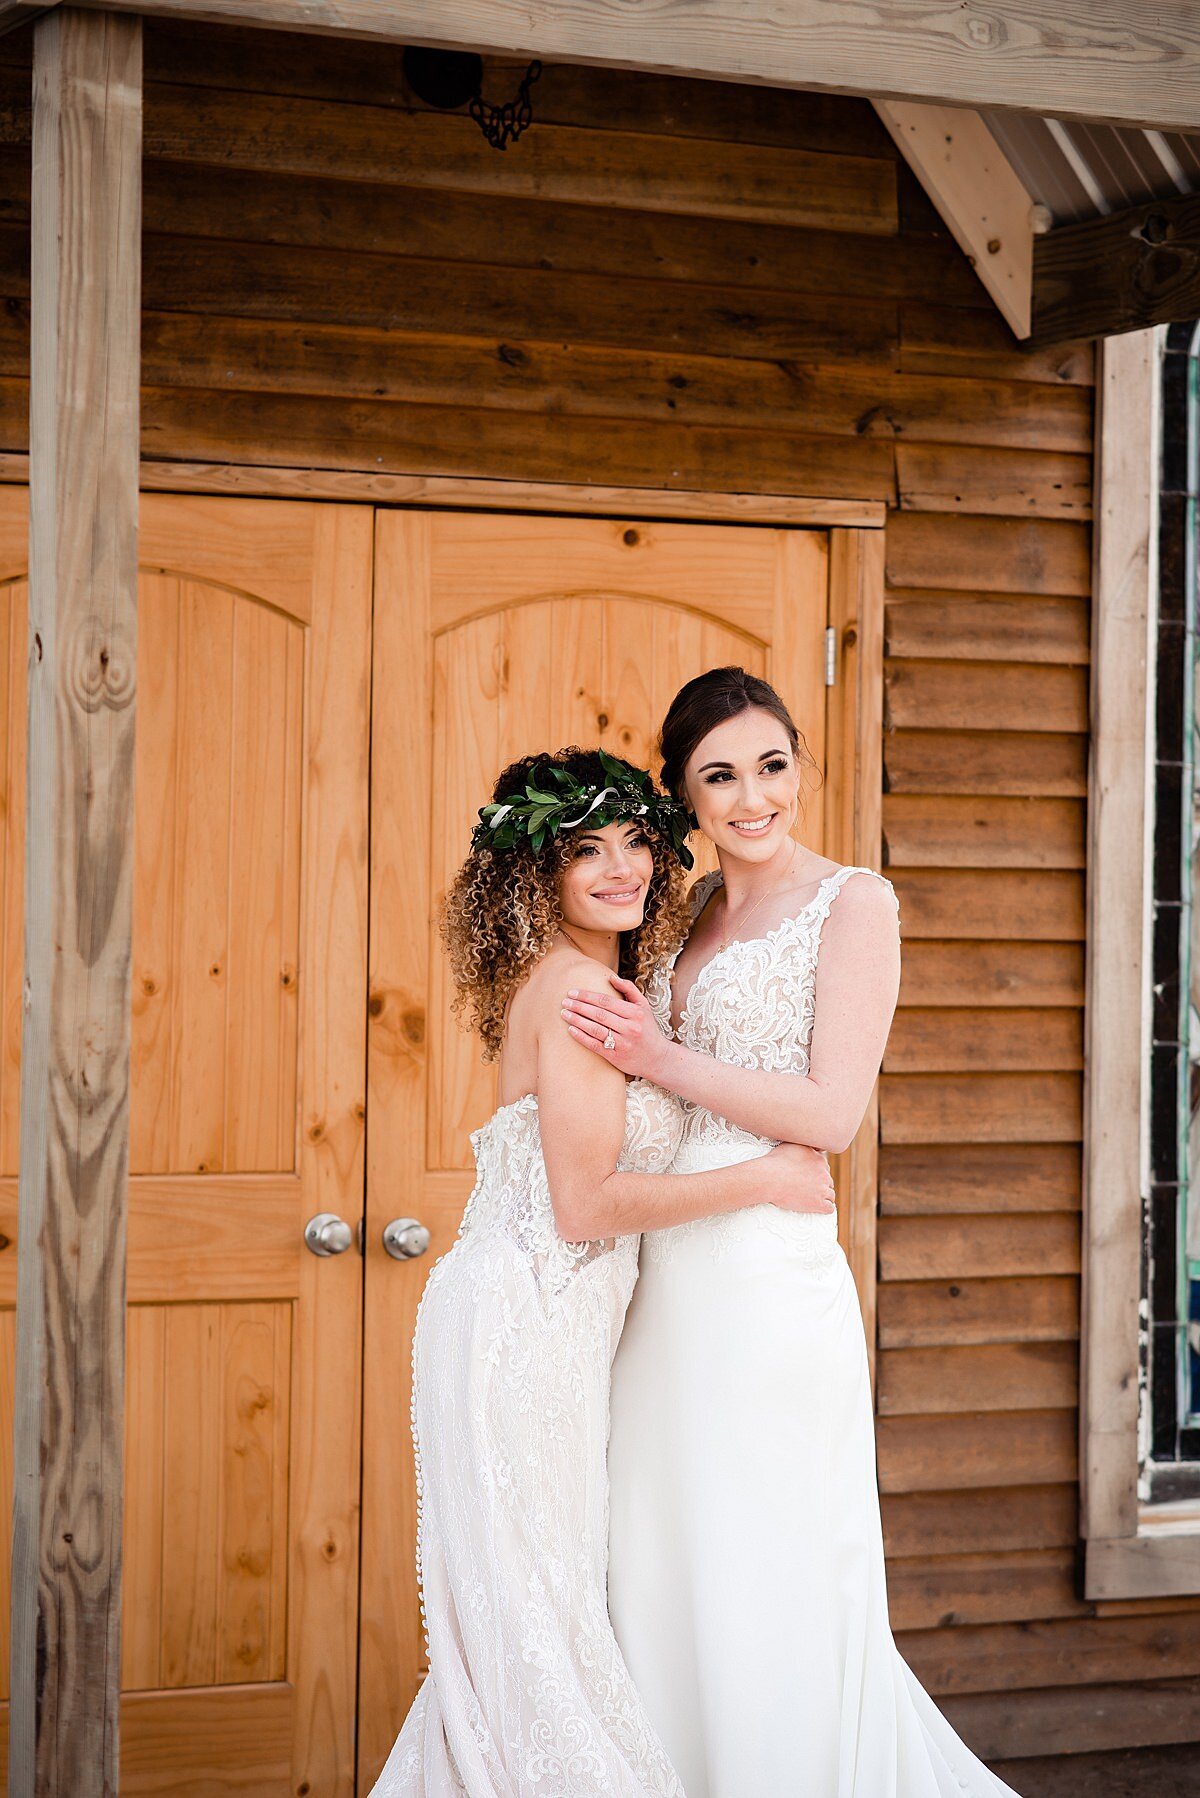 Brides eloping in front of a wooden cabin